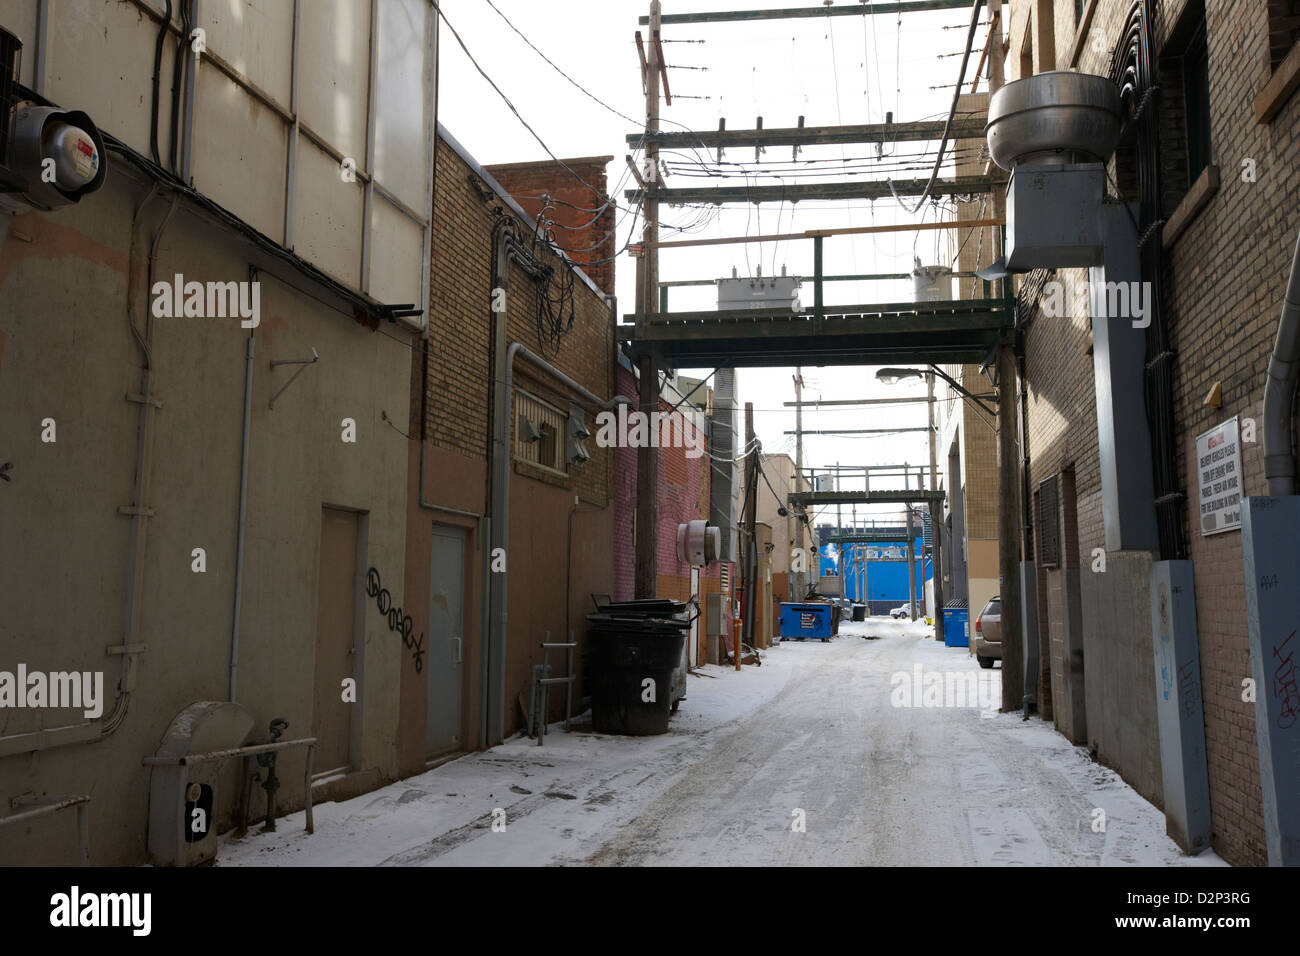 snow in an alleyway with electricity distribution in commerical area of downtown Saskatoon Saskatchewan Canada Stock Photo